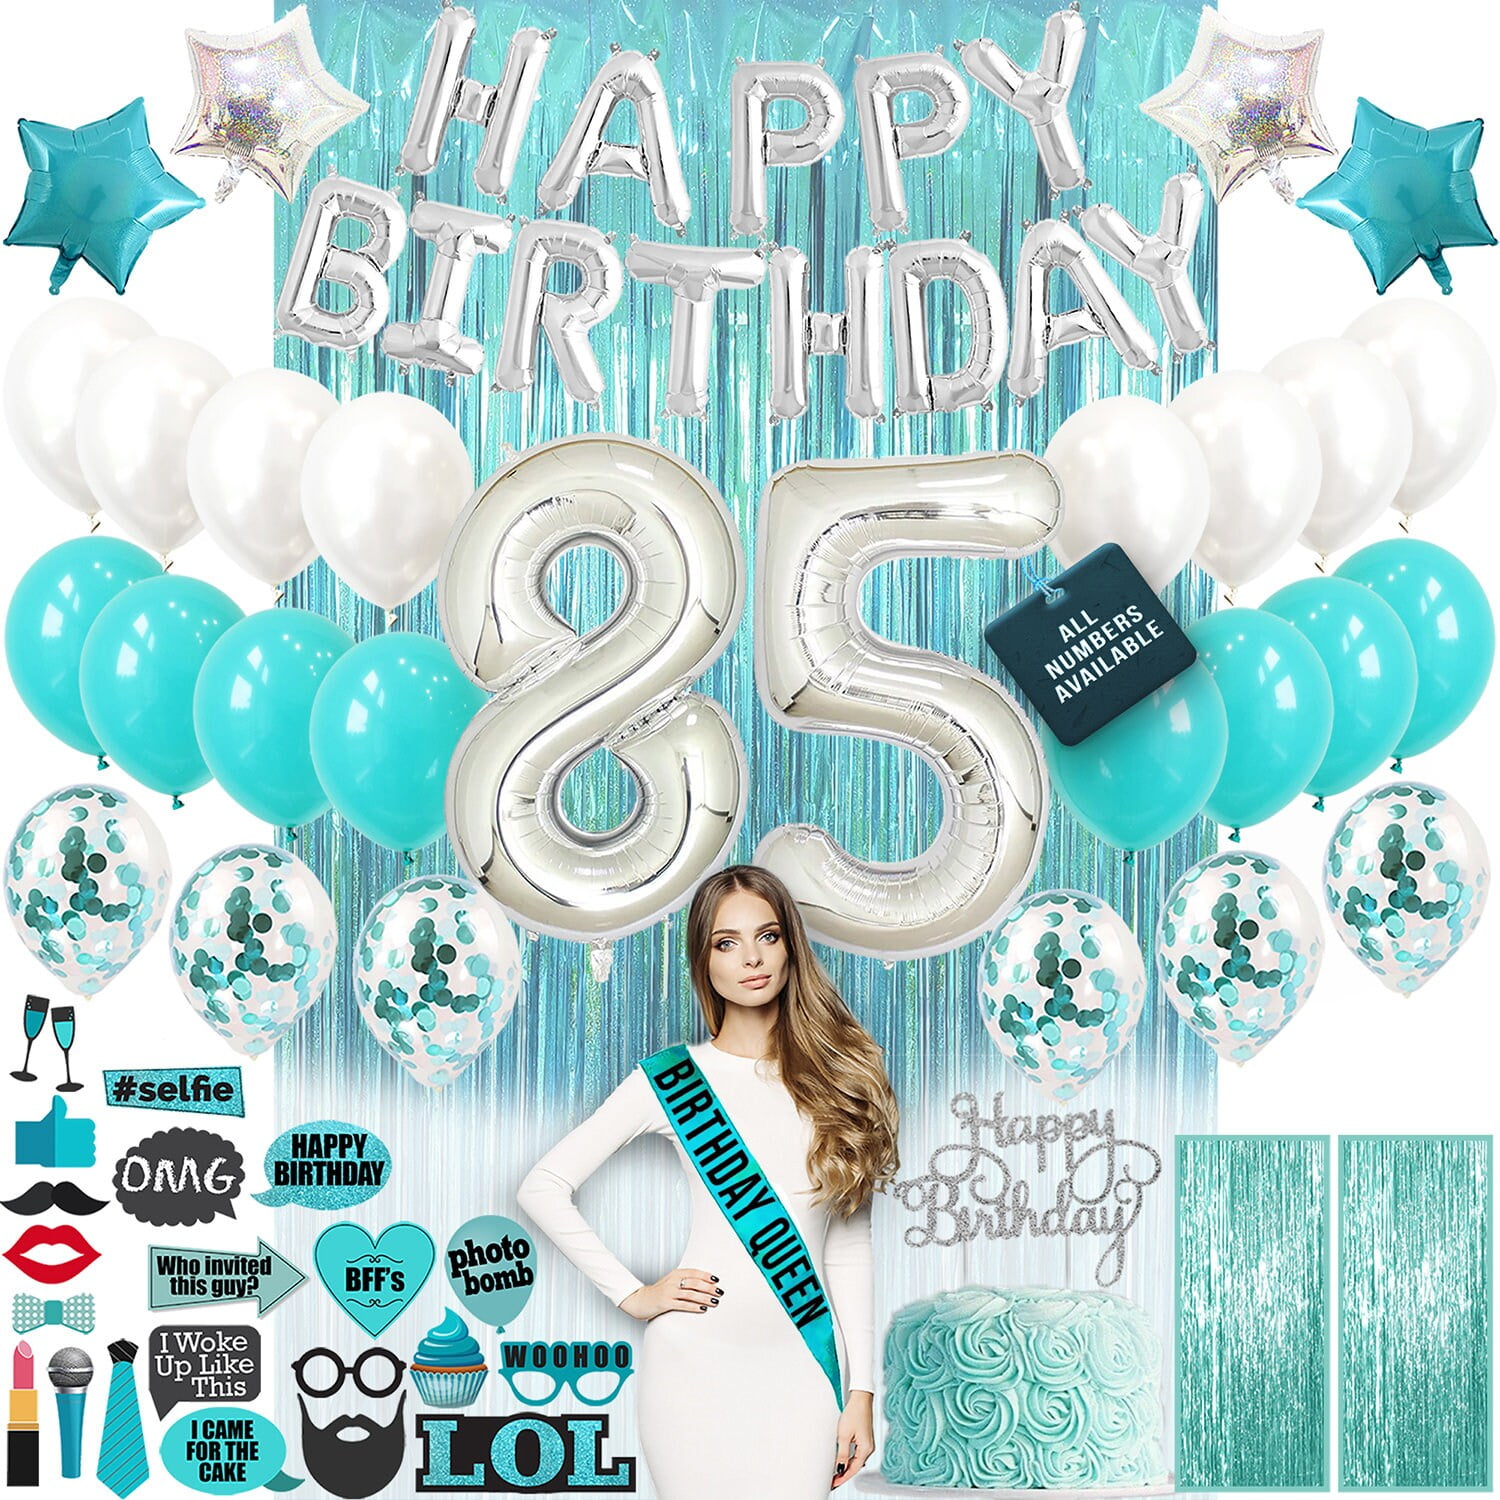 85th Birthday Decorations, 85th Birthday Party Supplies, 85th Birthday Banner Teal Green, Confetti Balloons Her, 85 Cake Topper, 85th Gifts - Walmart.com